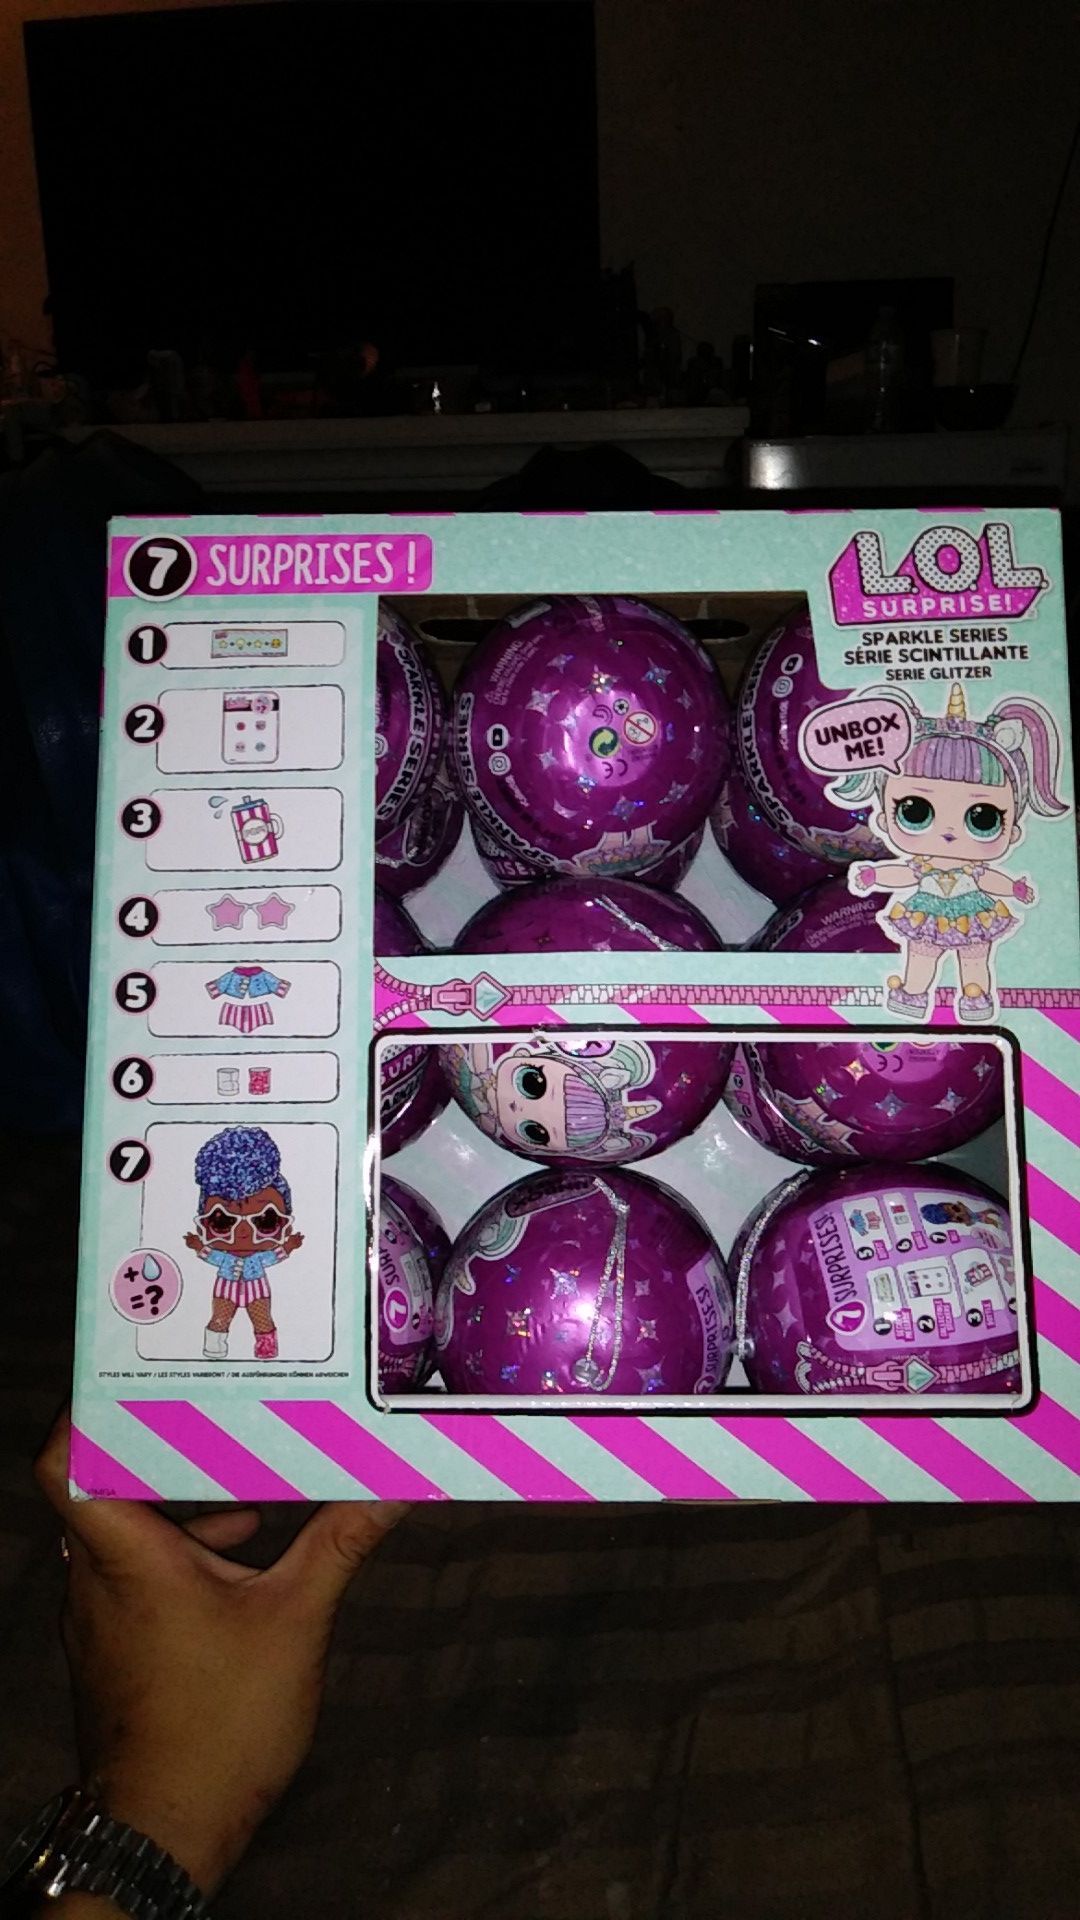 BRAND NEW IN PACKAGE NEVER OPENED LOL SURPRISE DOLLS SPARKLE SERIES